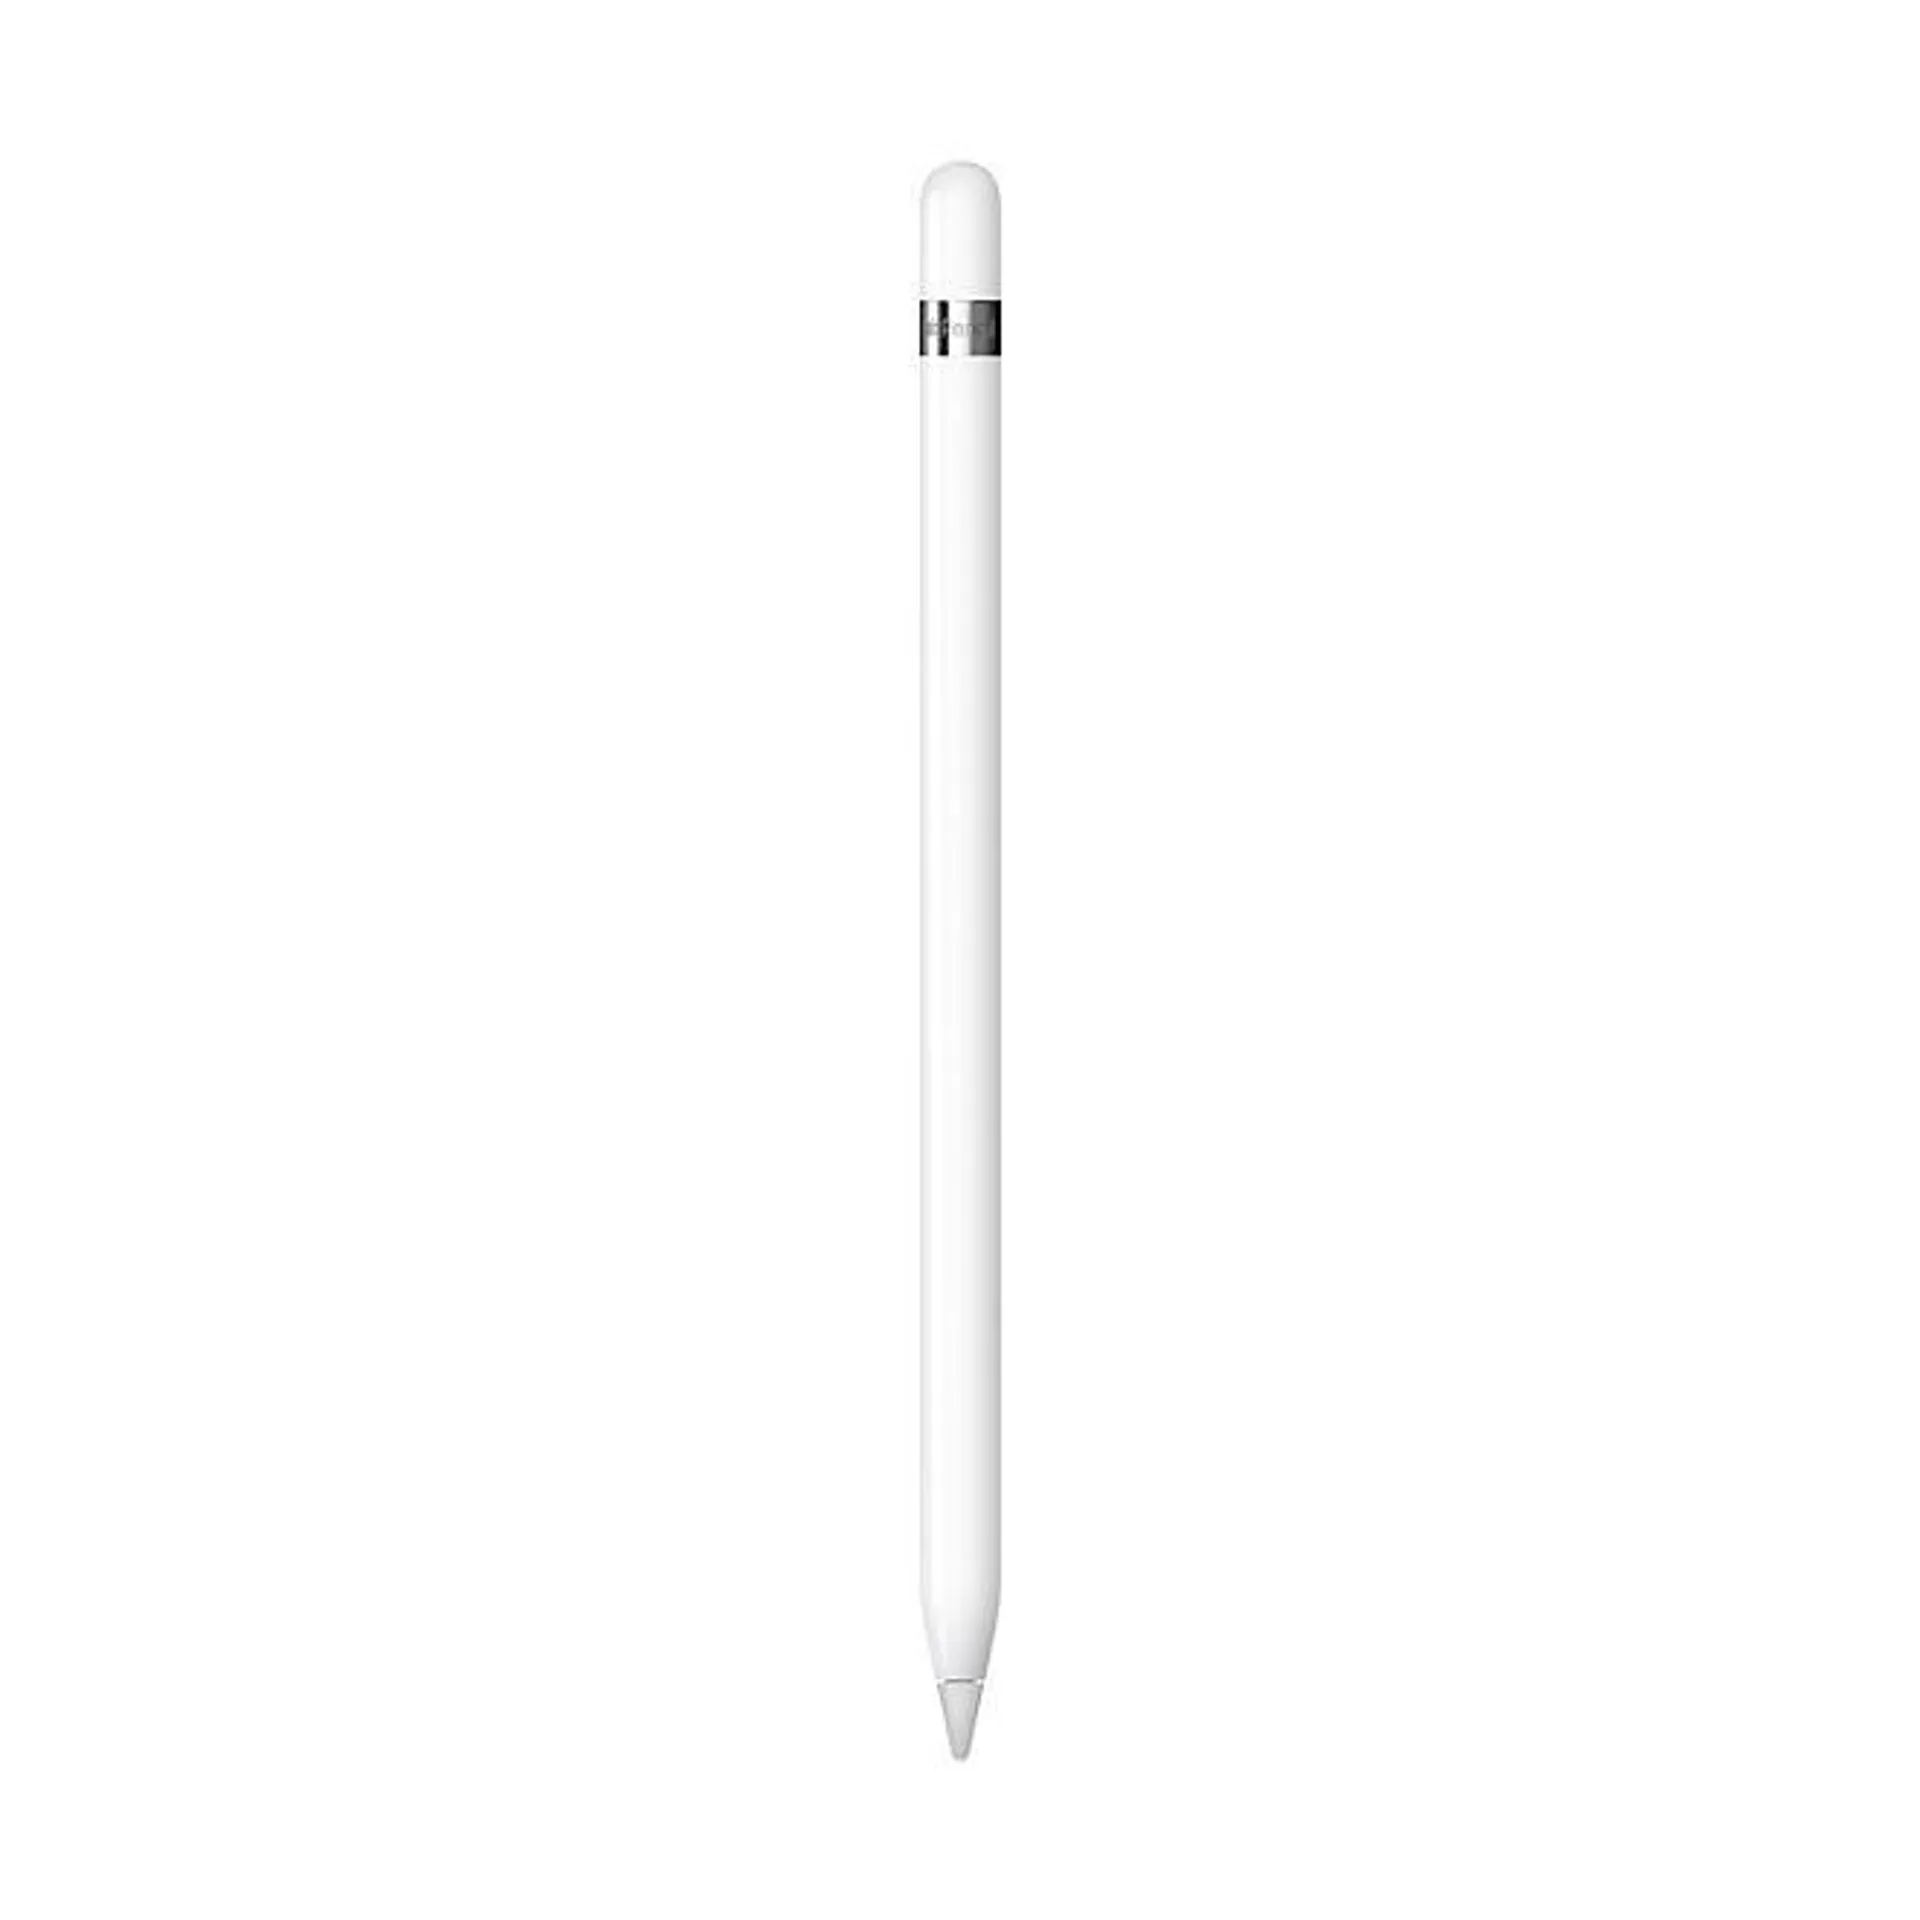 Apple Pencil (1st Generation) with USB-C adapter for iPad (9th and 10th gen)